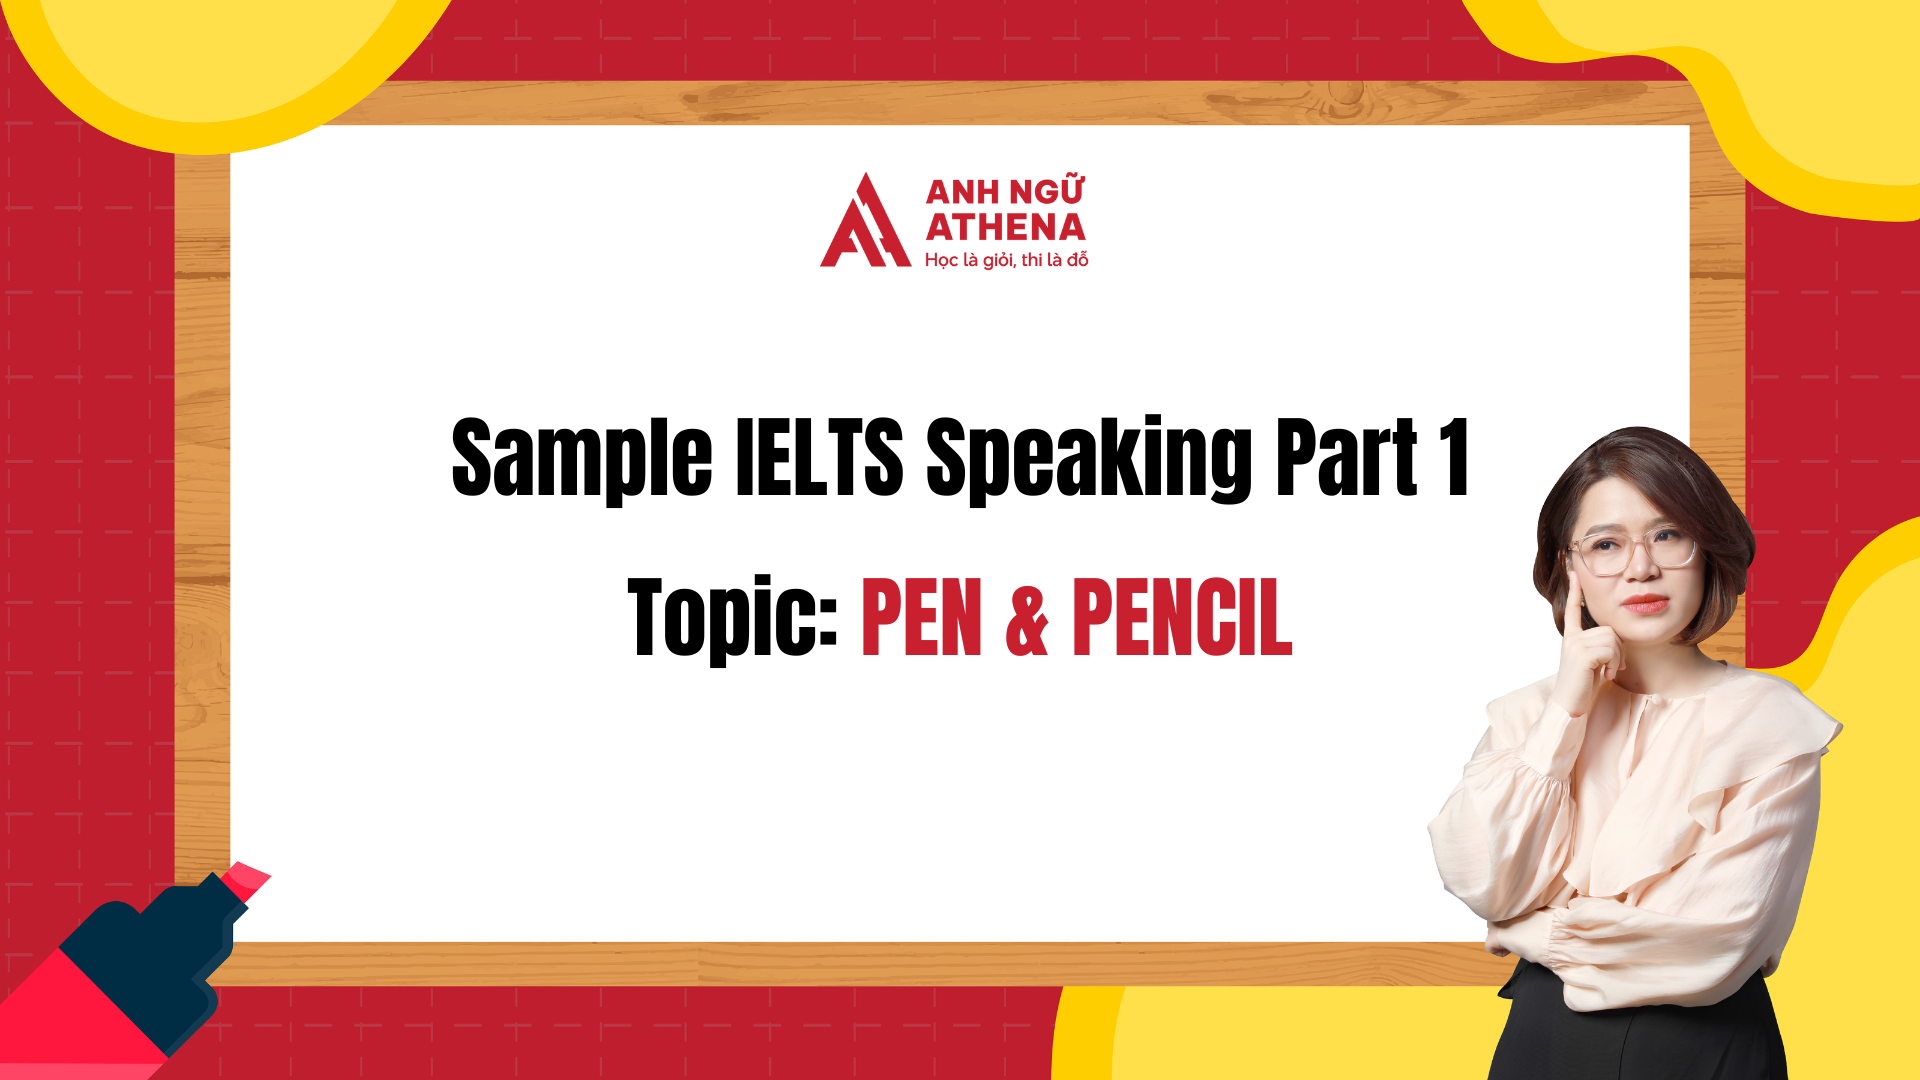 Sample IELTS Speaking Part 1 - PEN AND PENCIL